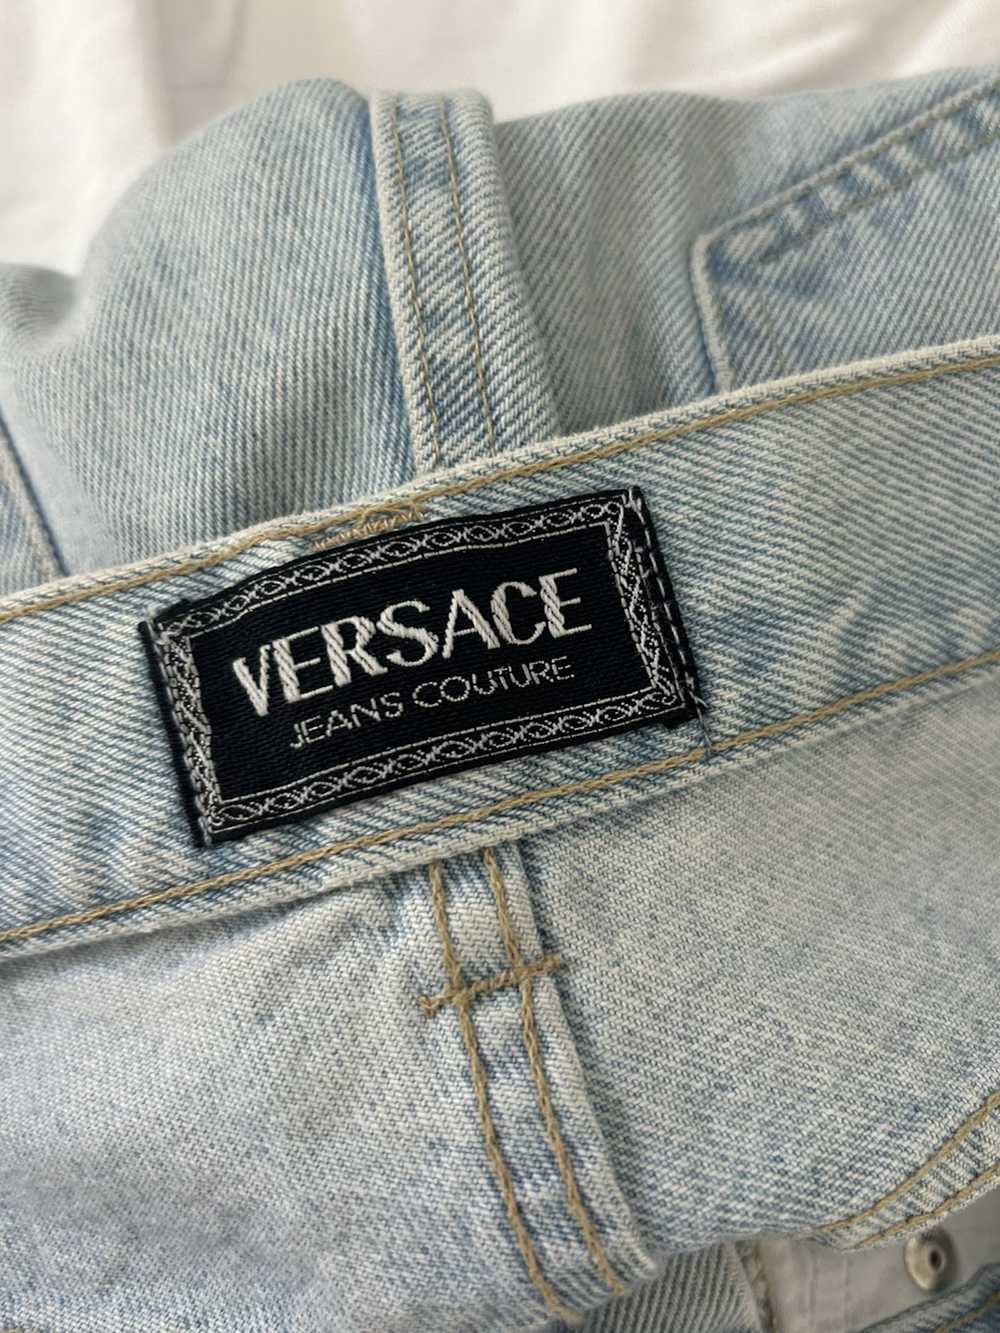 Versace Jeans Couture Classic Tapered jeans - image 3